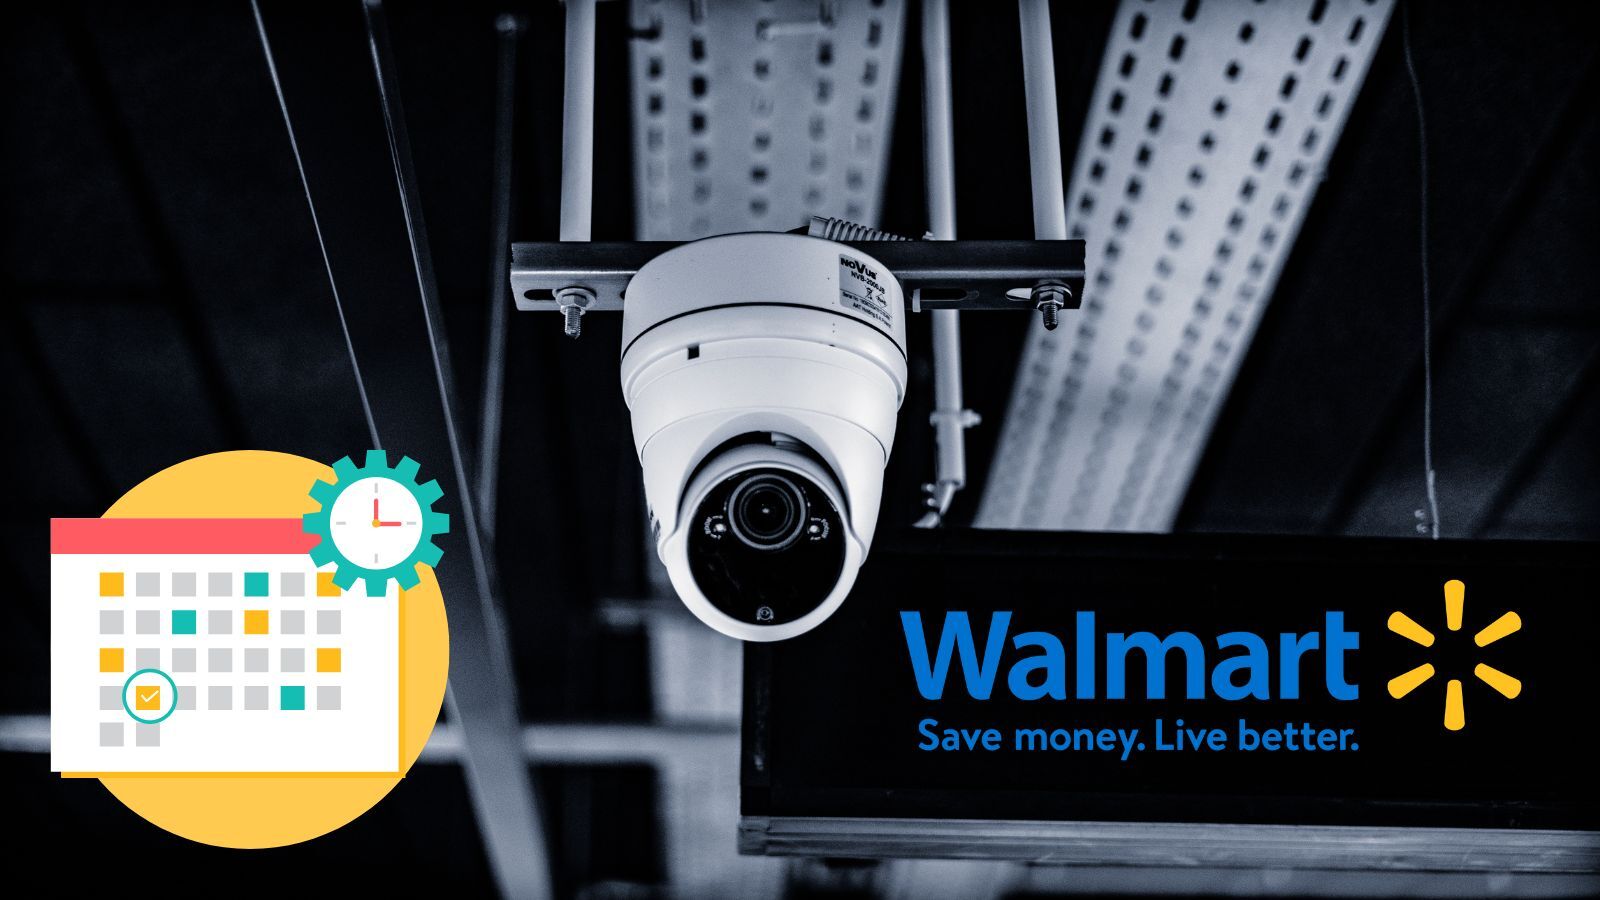 How Long Does Walmart Keep Security Footage? (All You Need to Know)